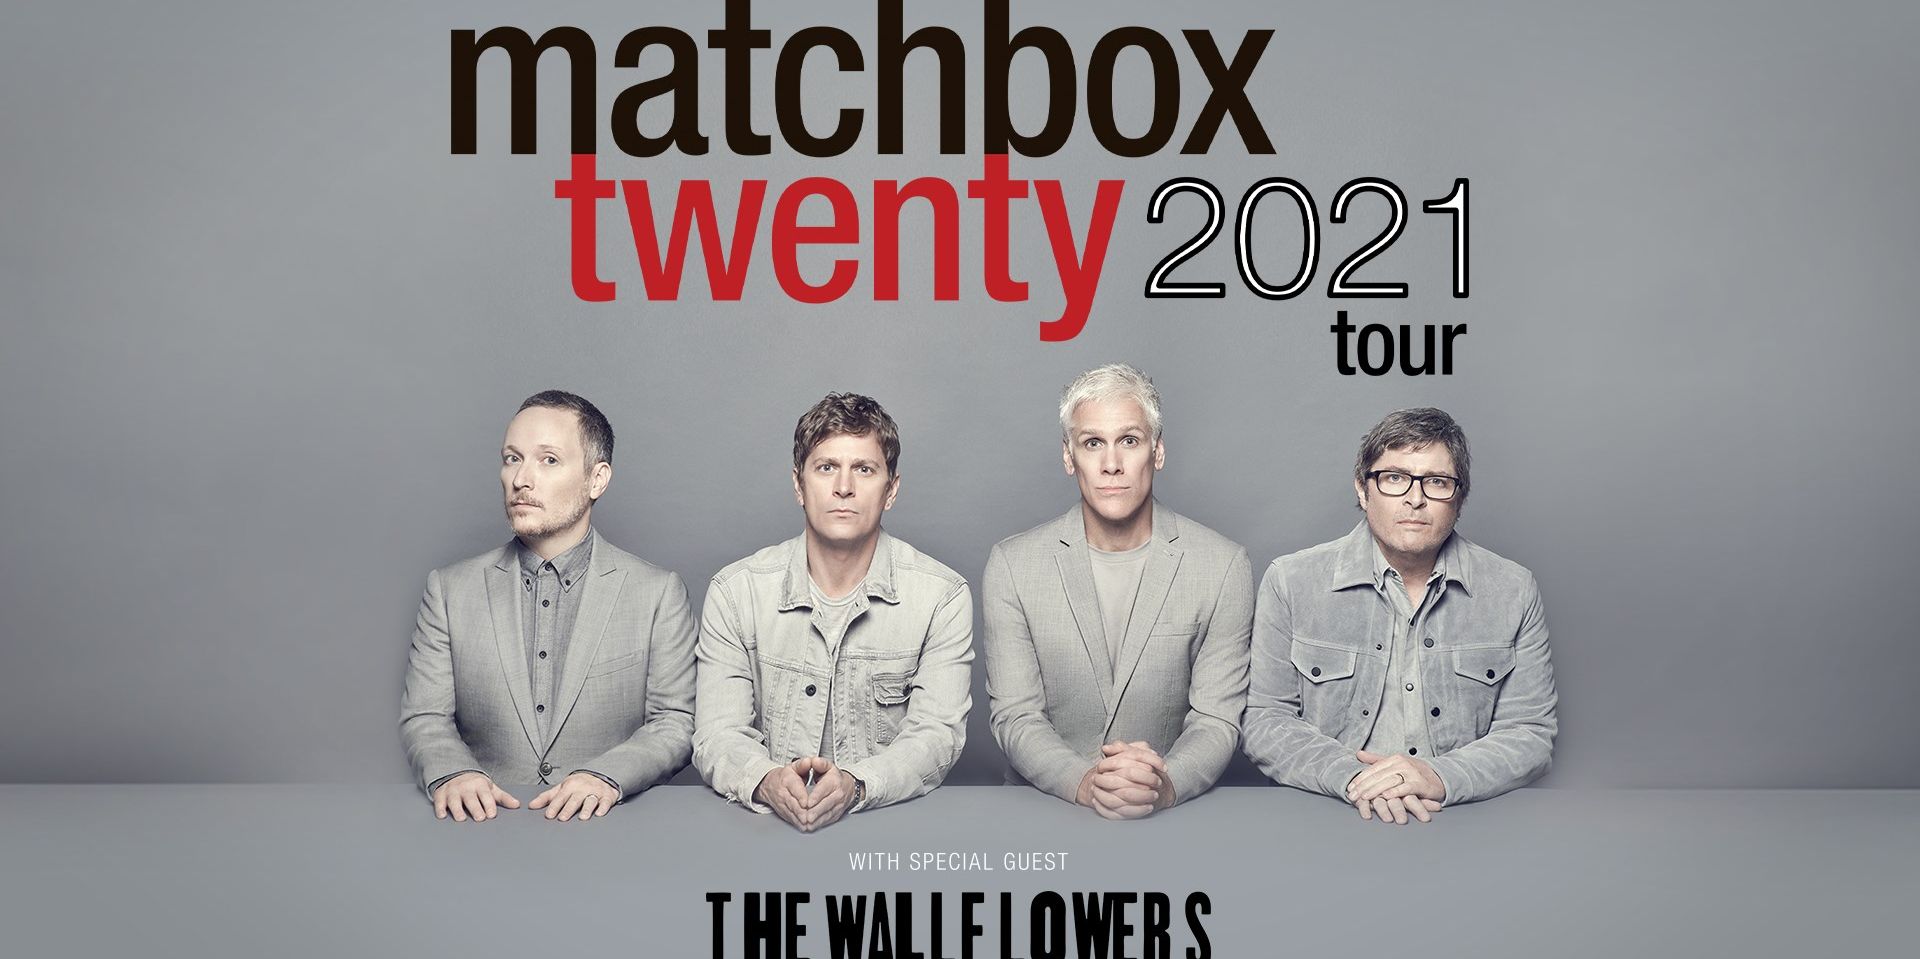 Matchbox Twenty 2021 with special guest The Wallflowers promotional image